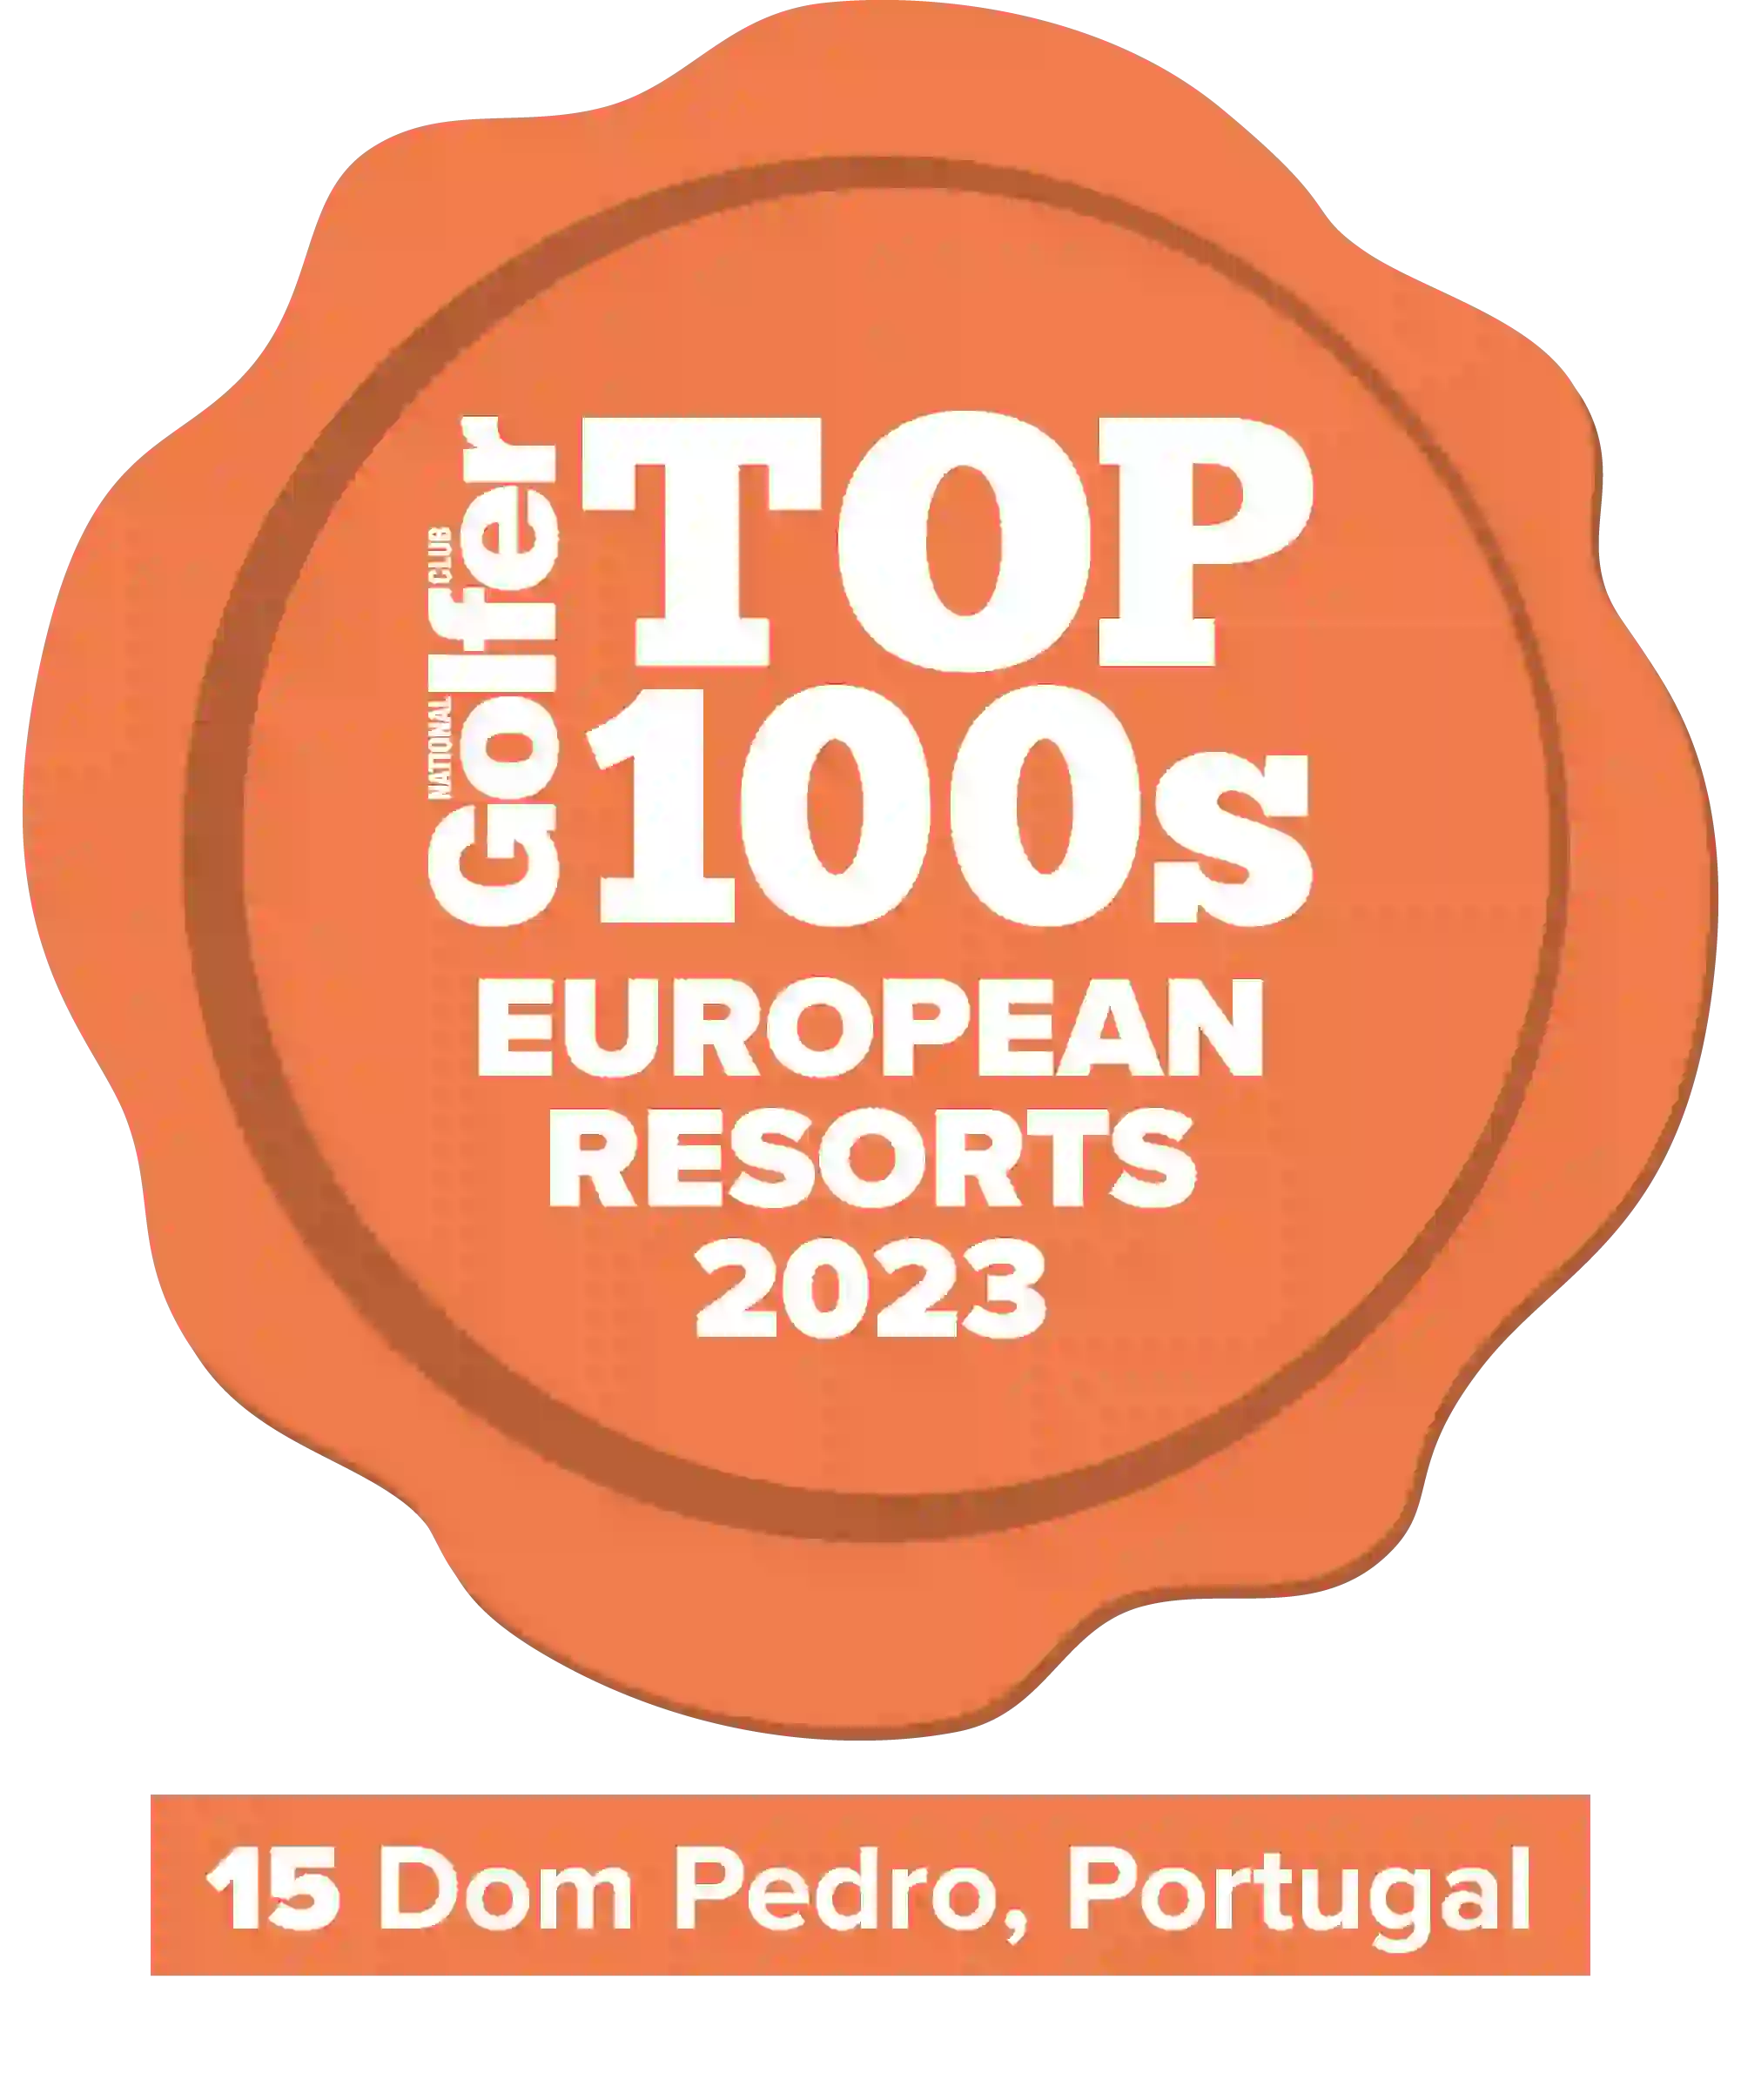 Europe's Top 100 Golf Resorts 2023: 15th Place